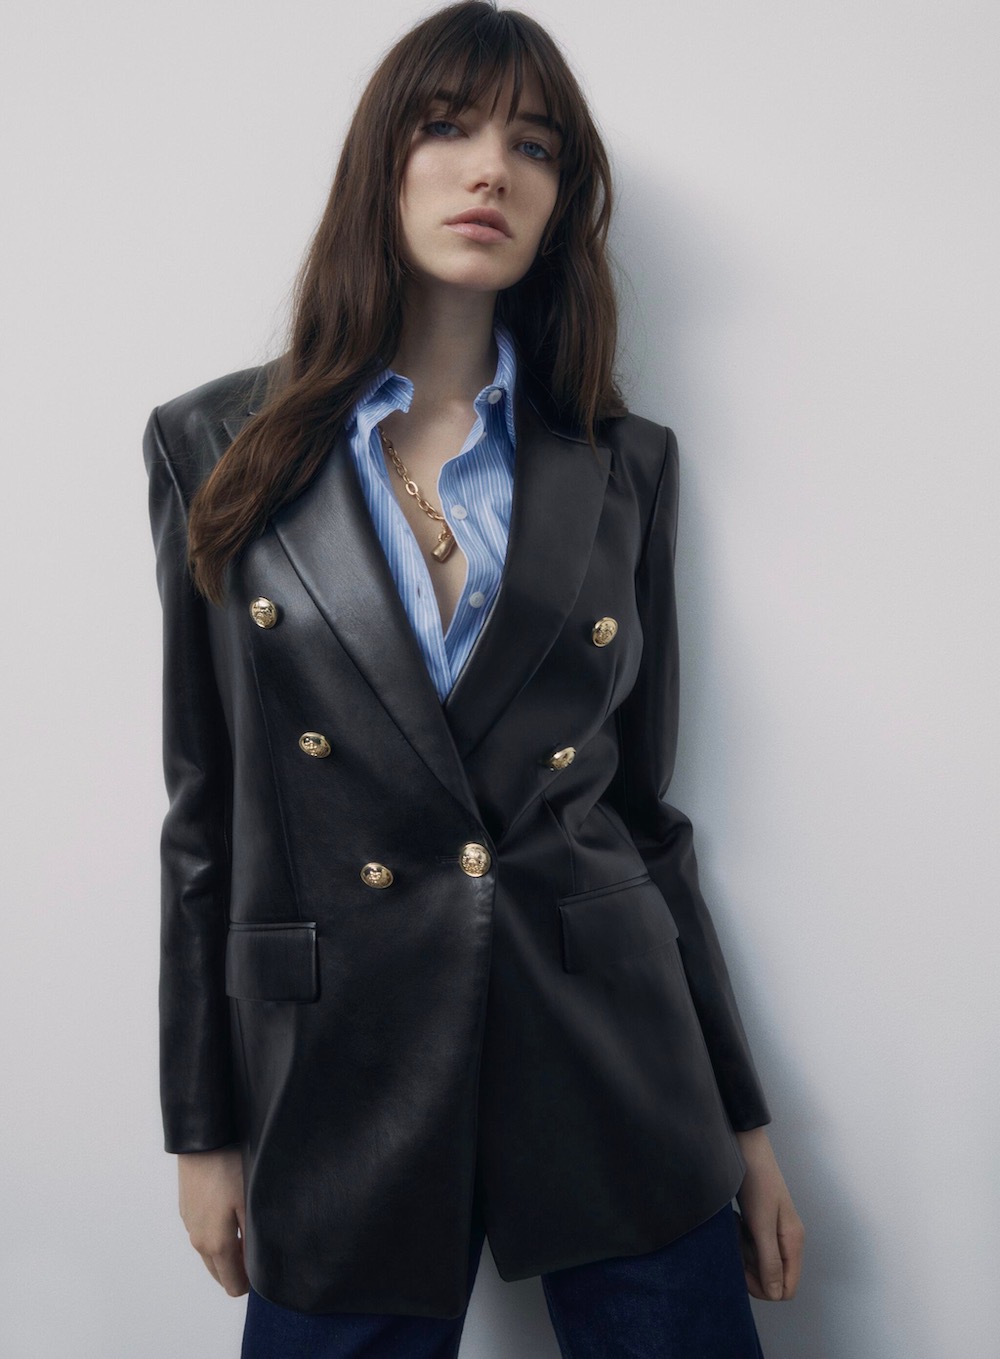 Black Leather Blazers to Wear This Winter - theFashionSpot